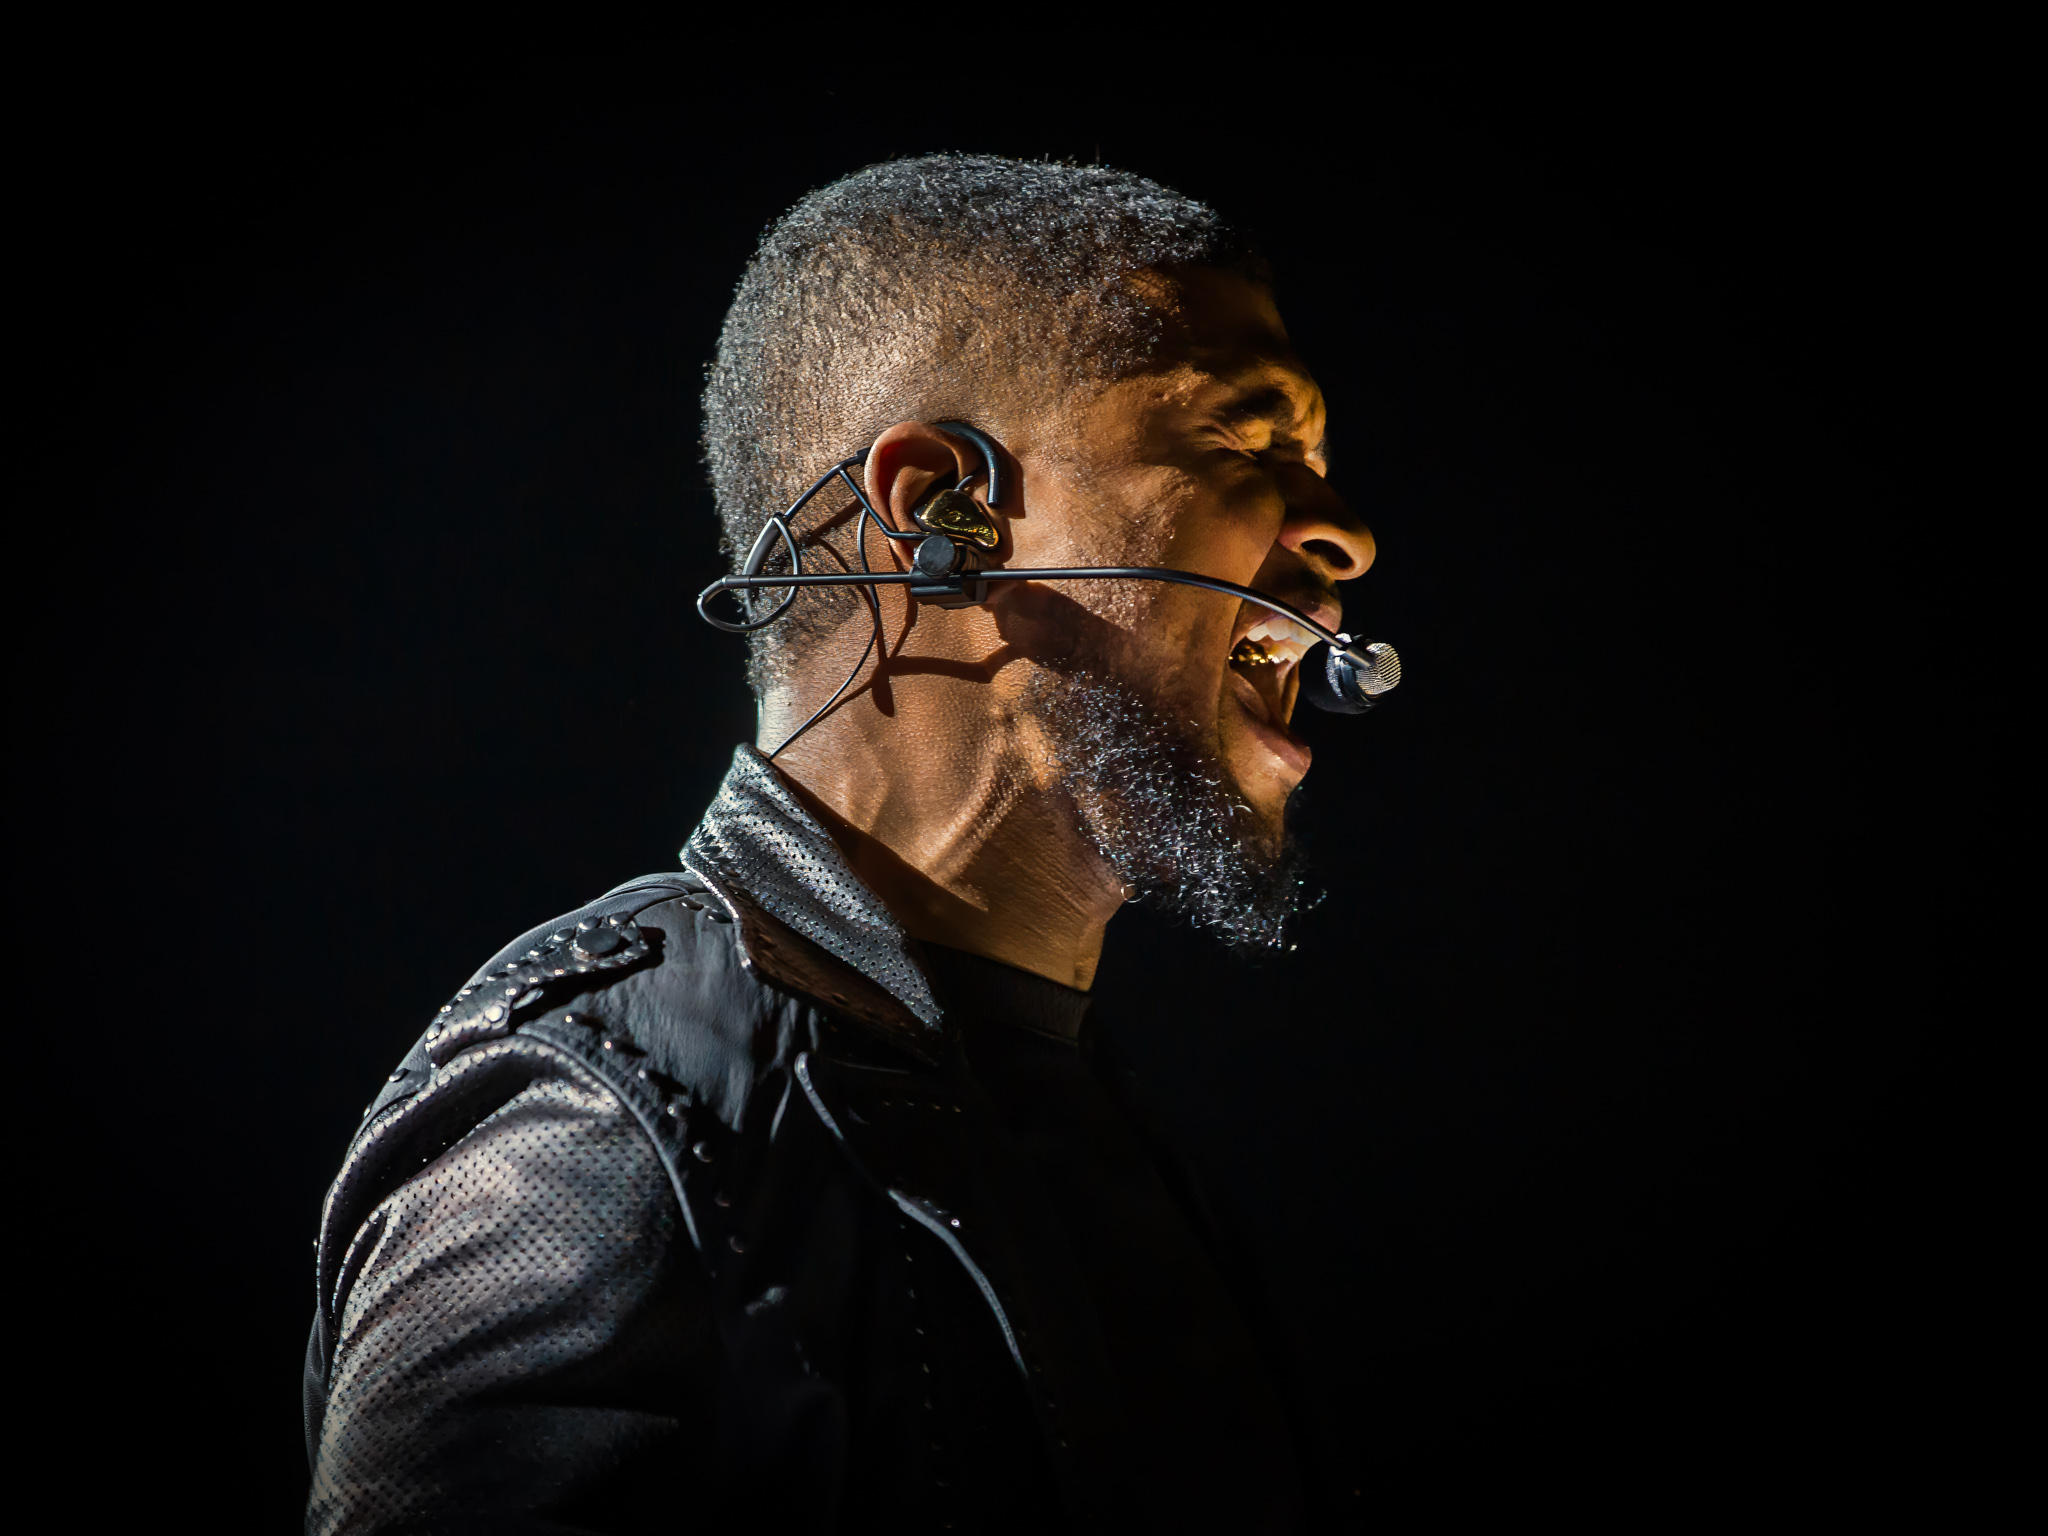 Usher by Bullet-ray Photography